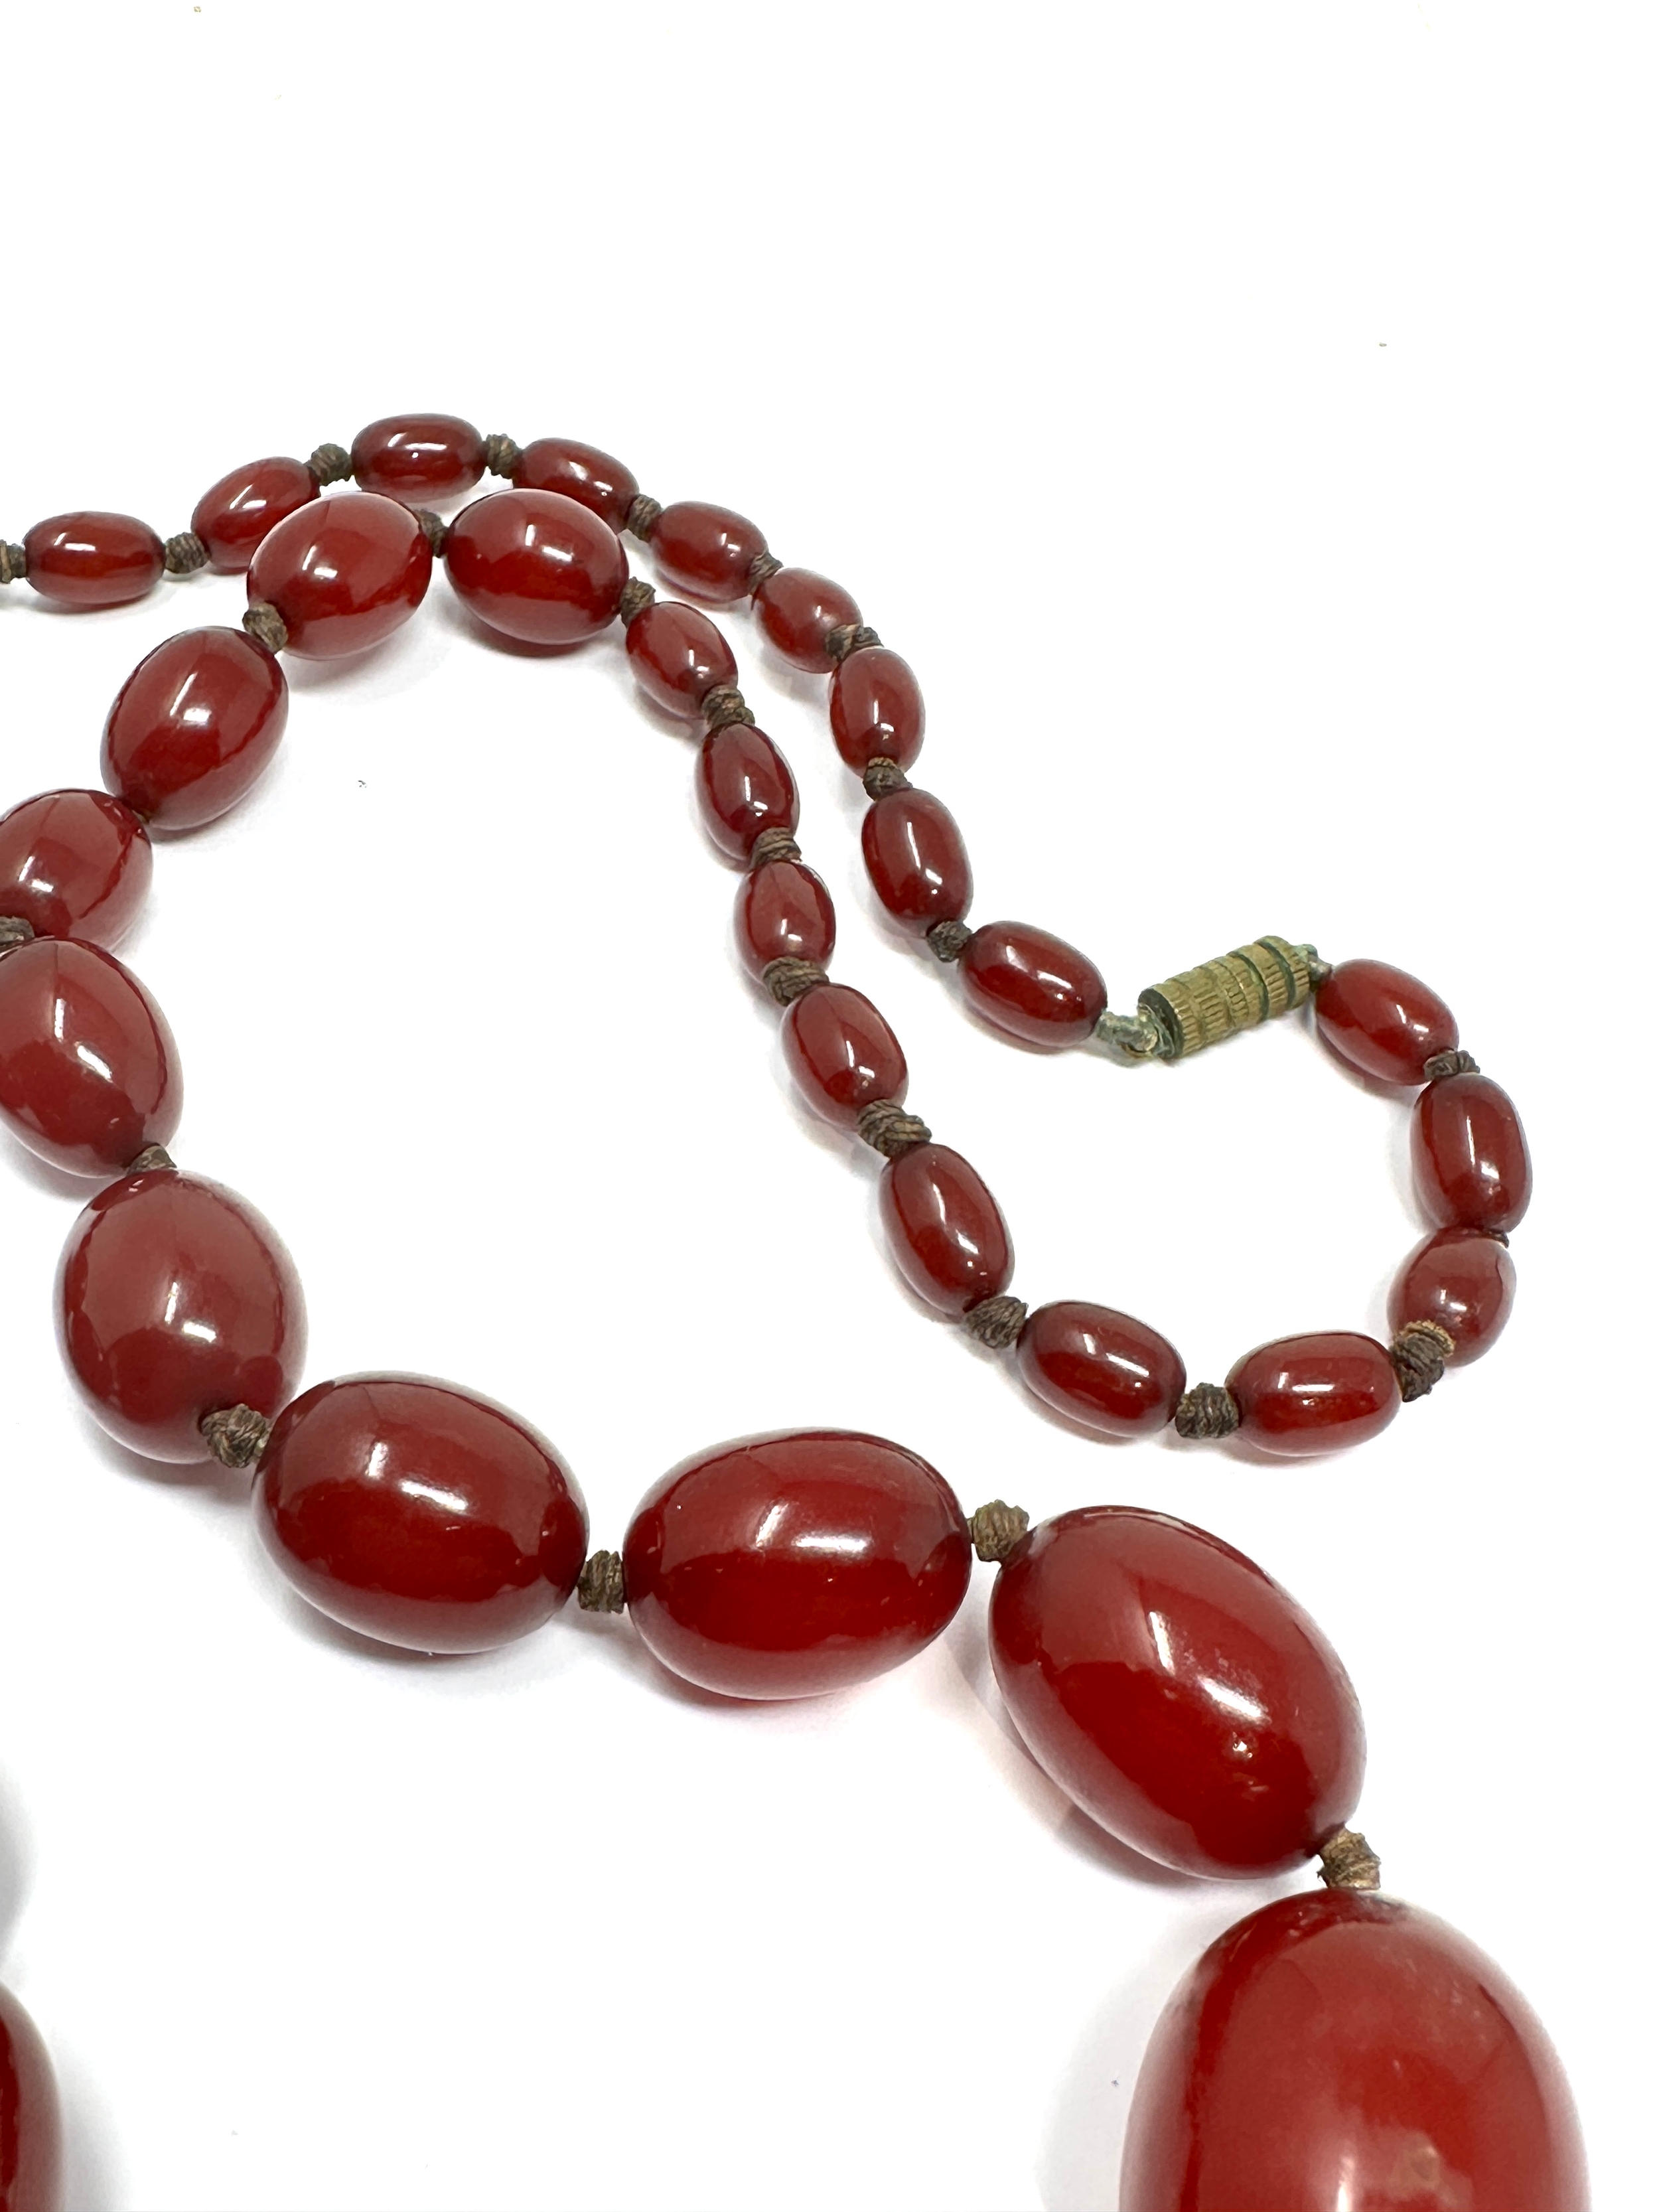 Antique / vintage cherry bakelite graduated bead necklace largest bead measures approx 30mm by - Image 4 of 4